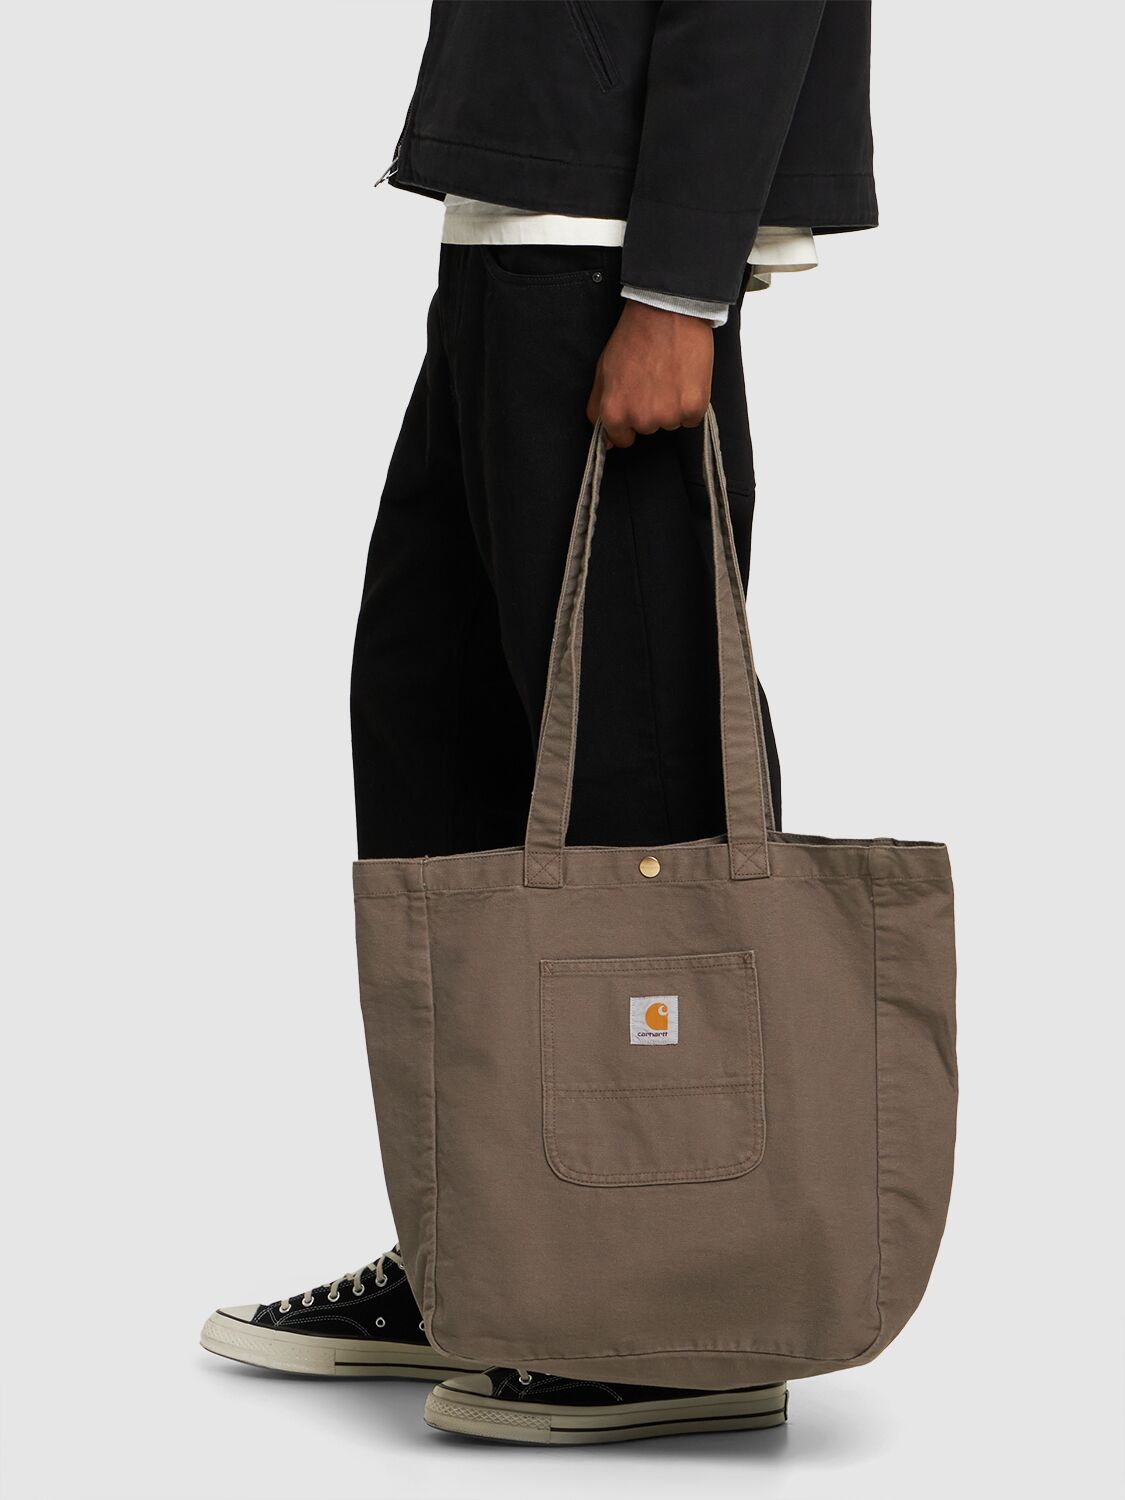 Brown Essentials small recycled-fibre cross-body bag, Carhartt WIP